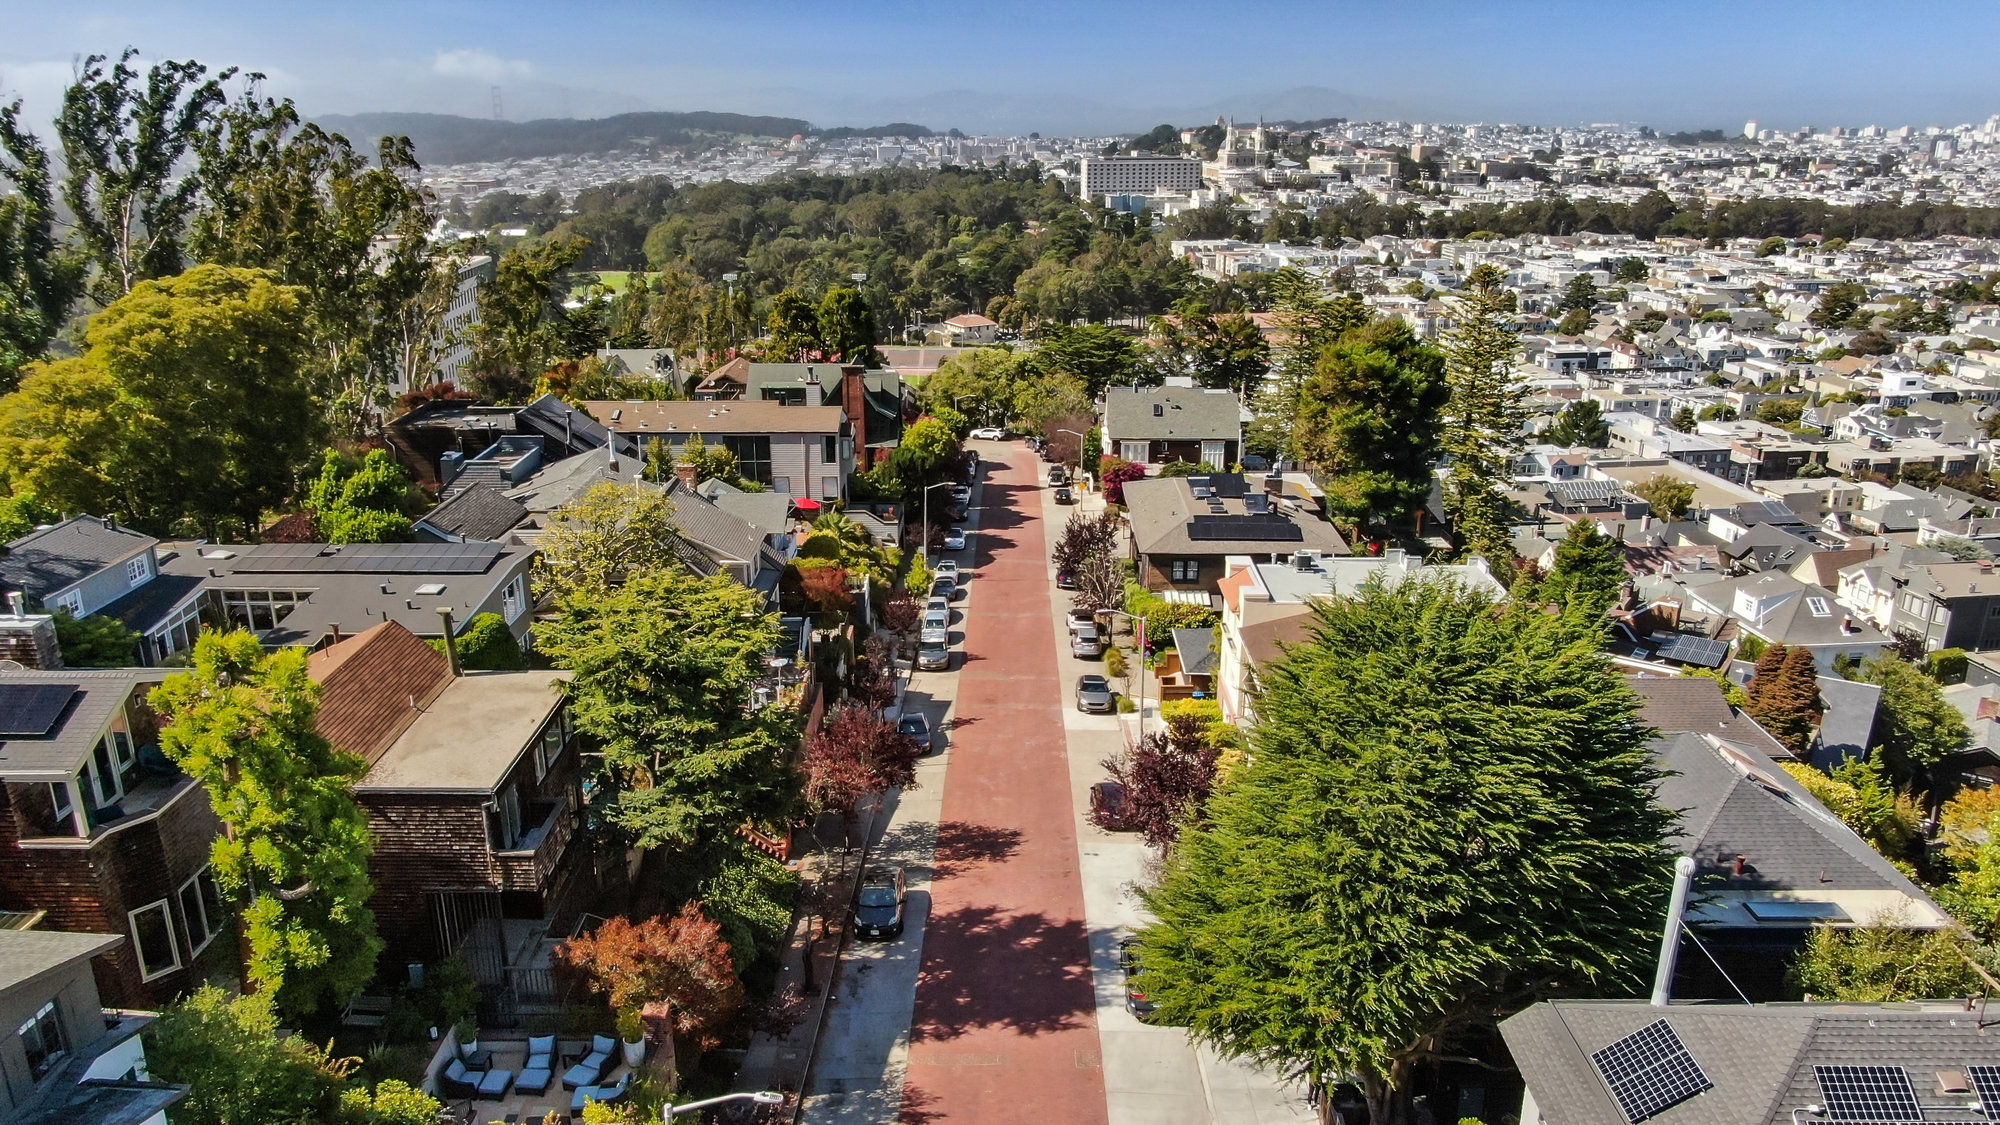 Street view of Edgewood Ave, showing San Francisco and the Bay Area